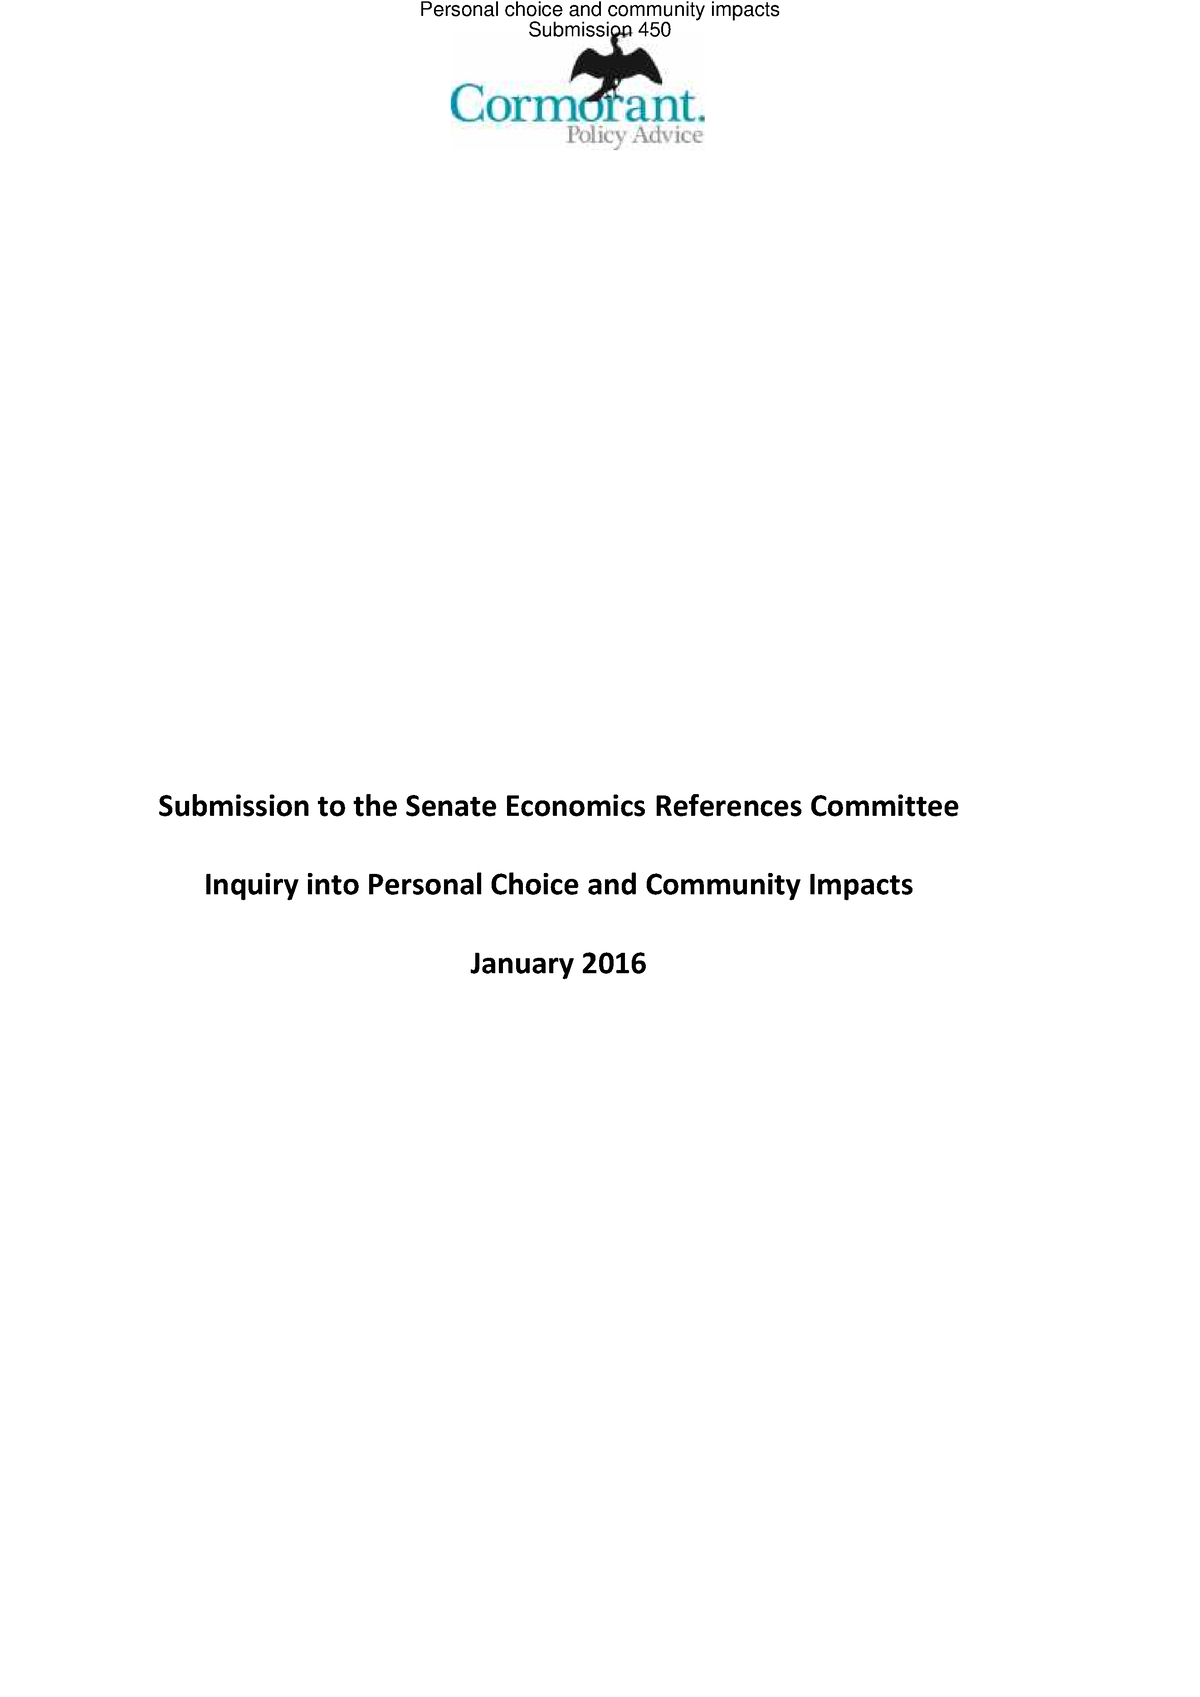 e-cig-as-risk-reduction-devices-submission-to-the-senate-economics